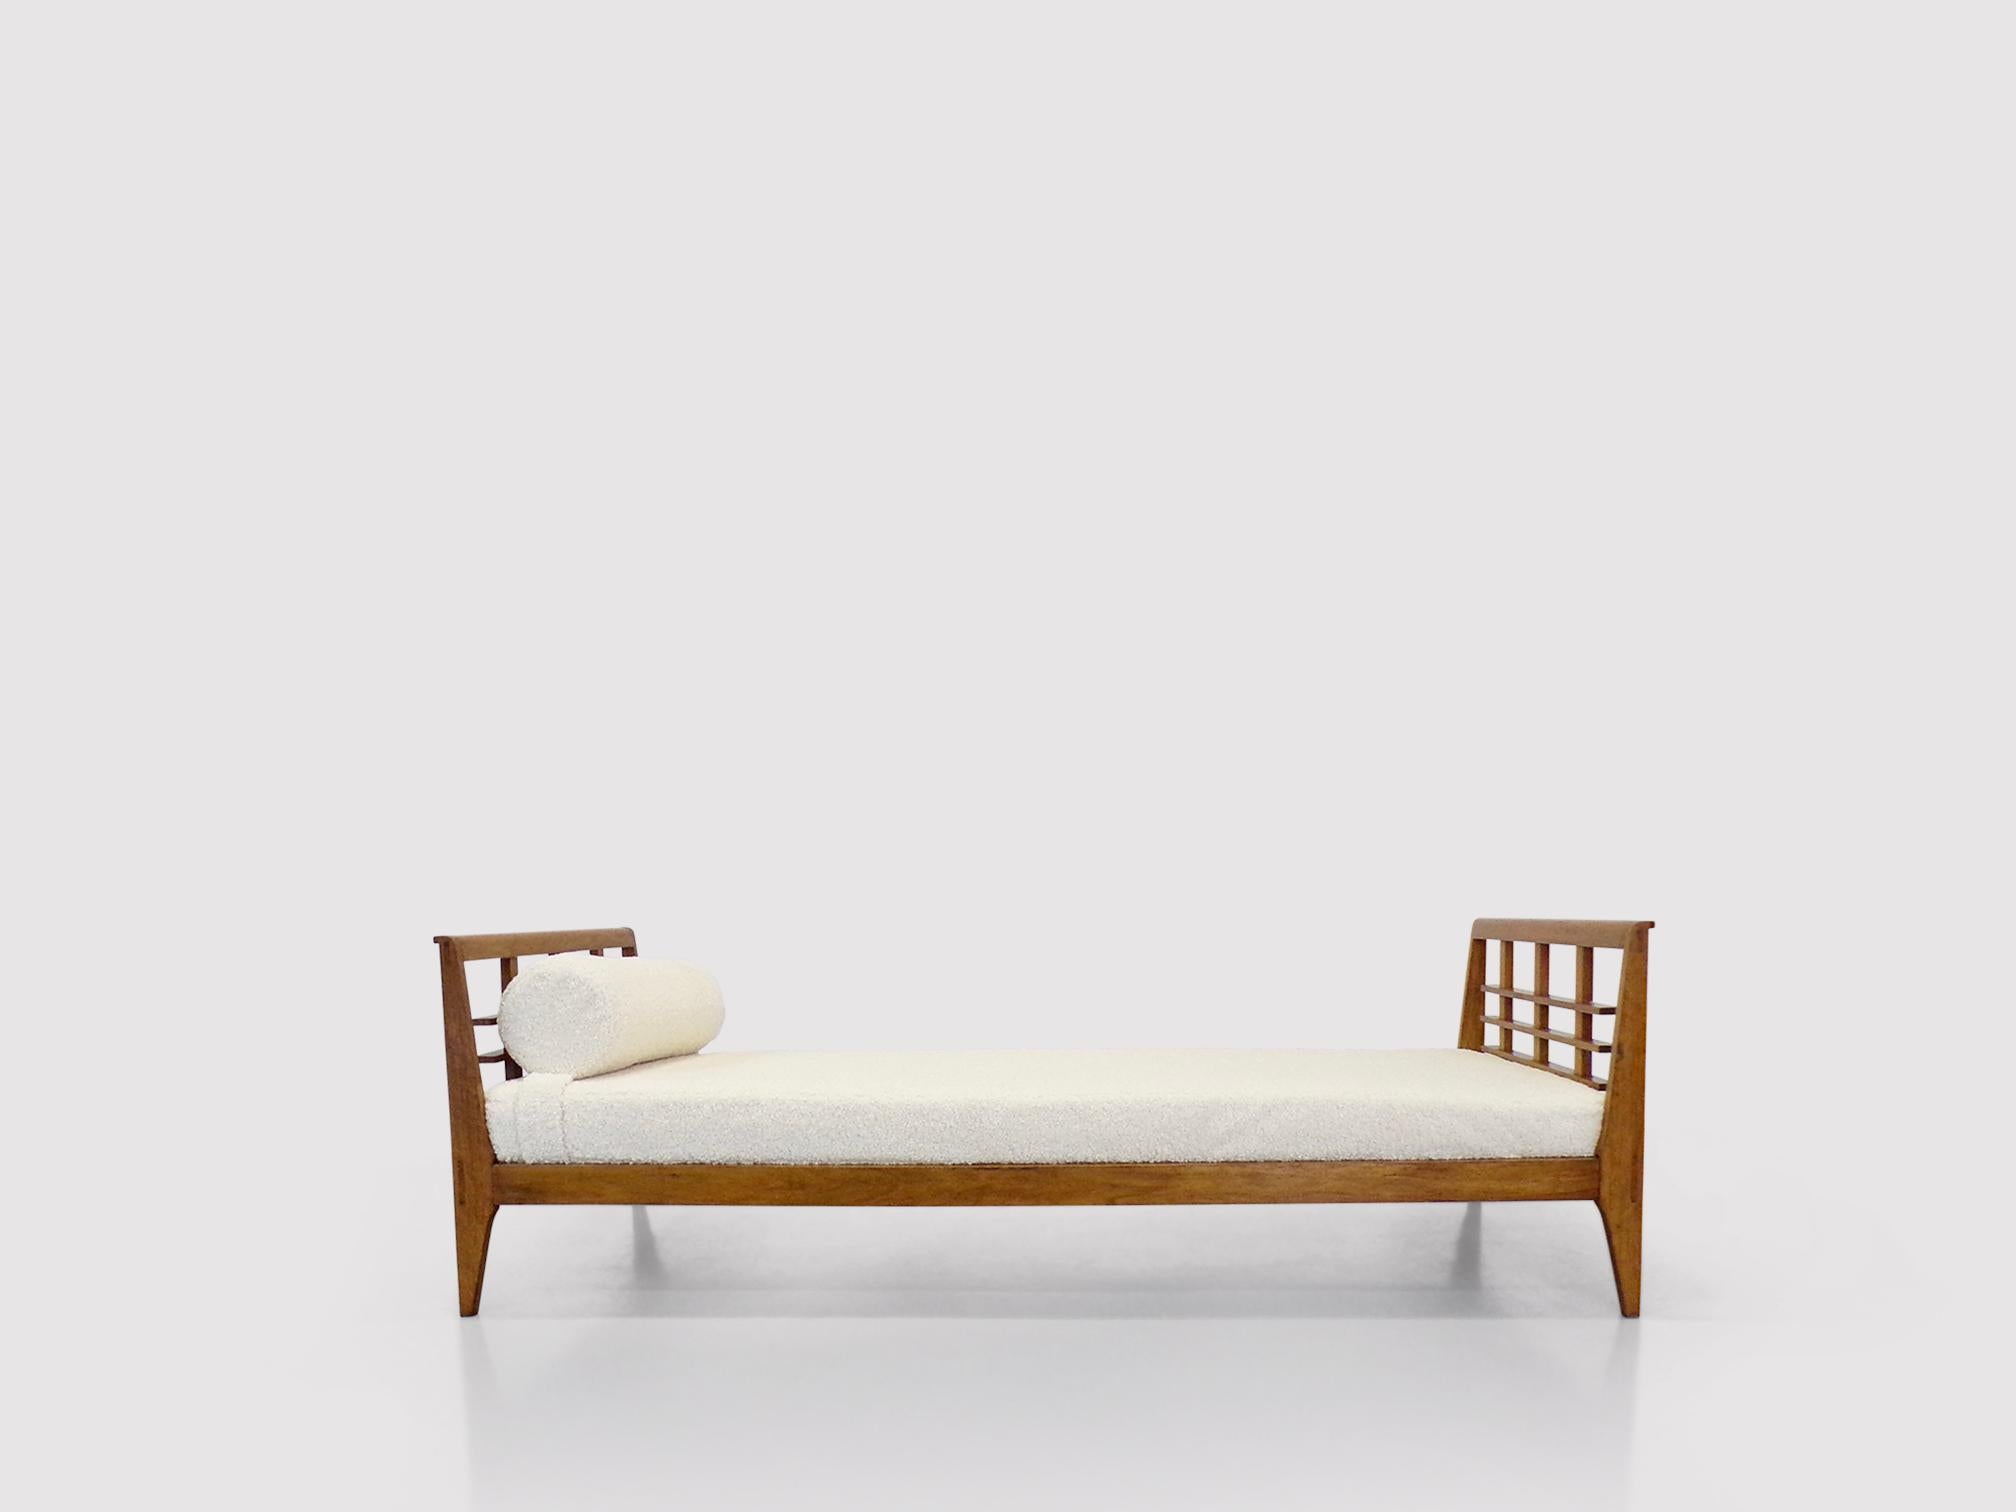 Reconstruction daybed from Rene Gabriel originating from the 50s.

The bed has a solid oak frame and features a remarkable design for the headends. The headends have been lifted and the internal geometry of the headends is quite interesting with a